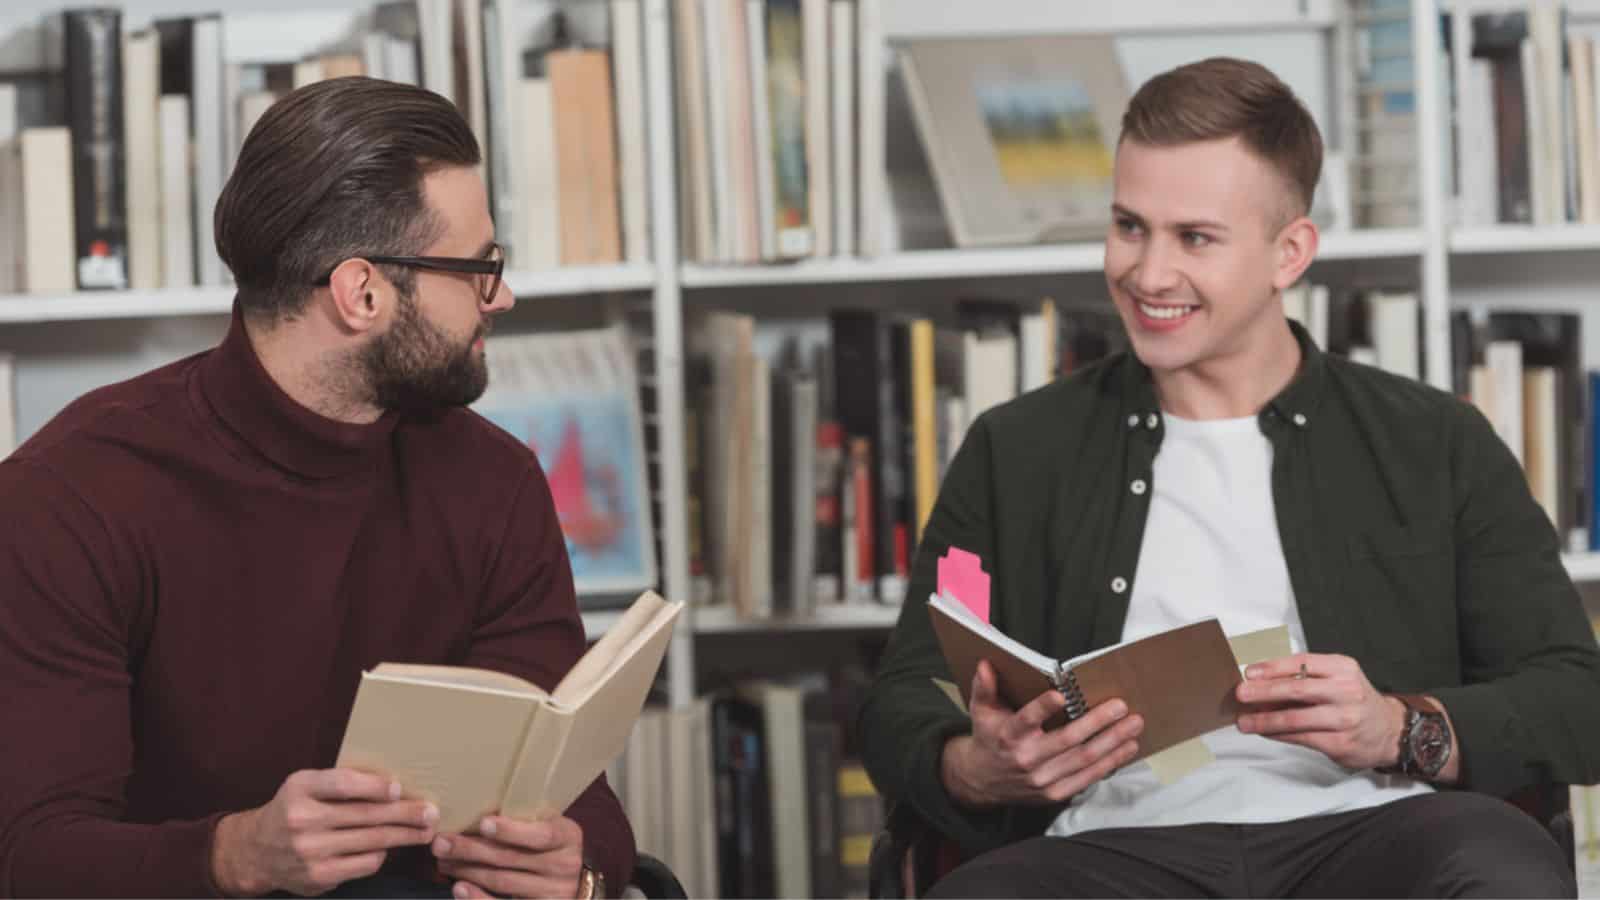 Smiling handsome men sitting with books in library